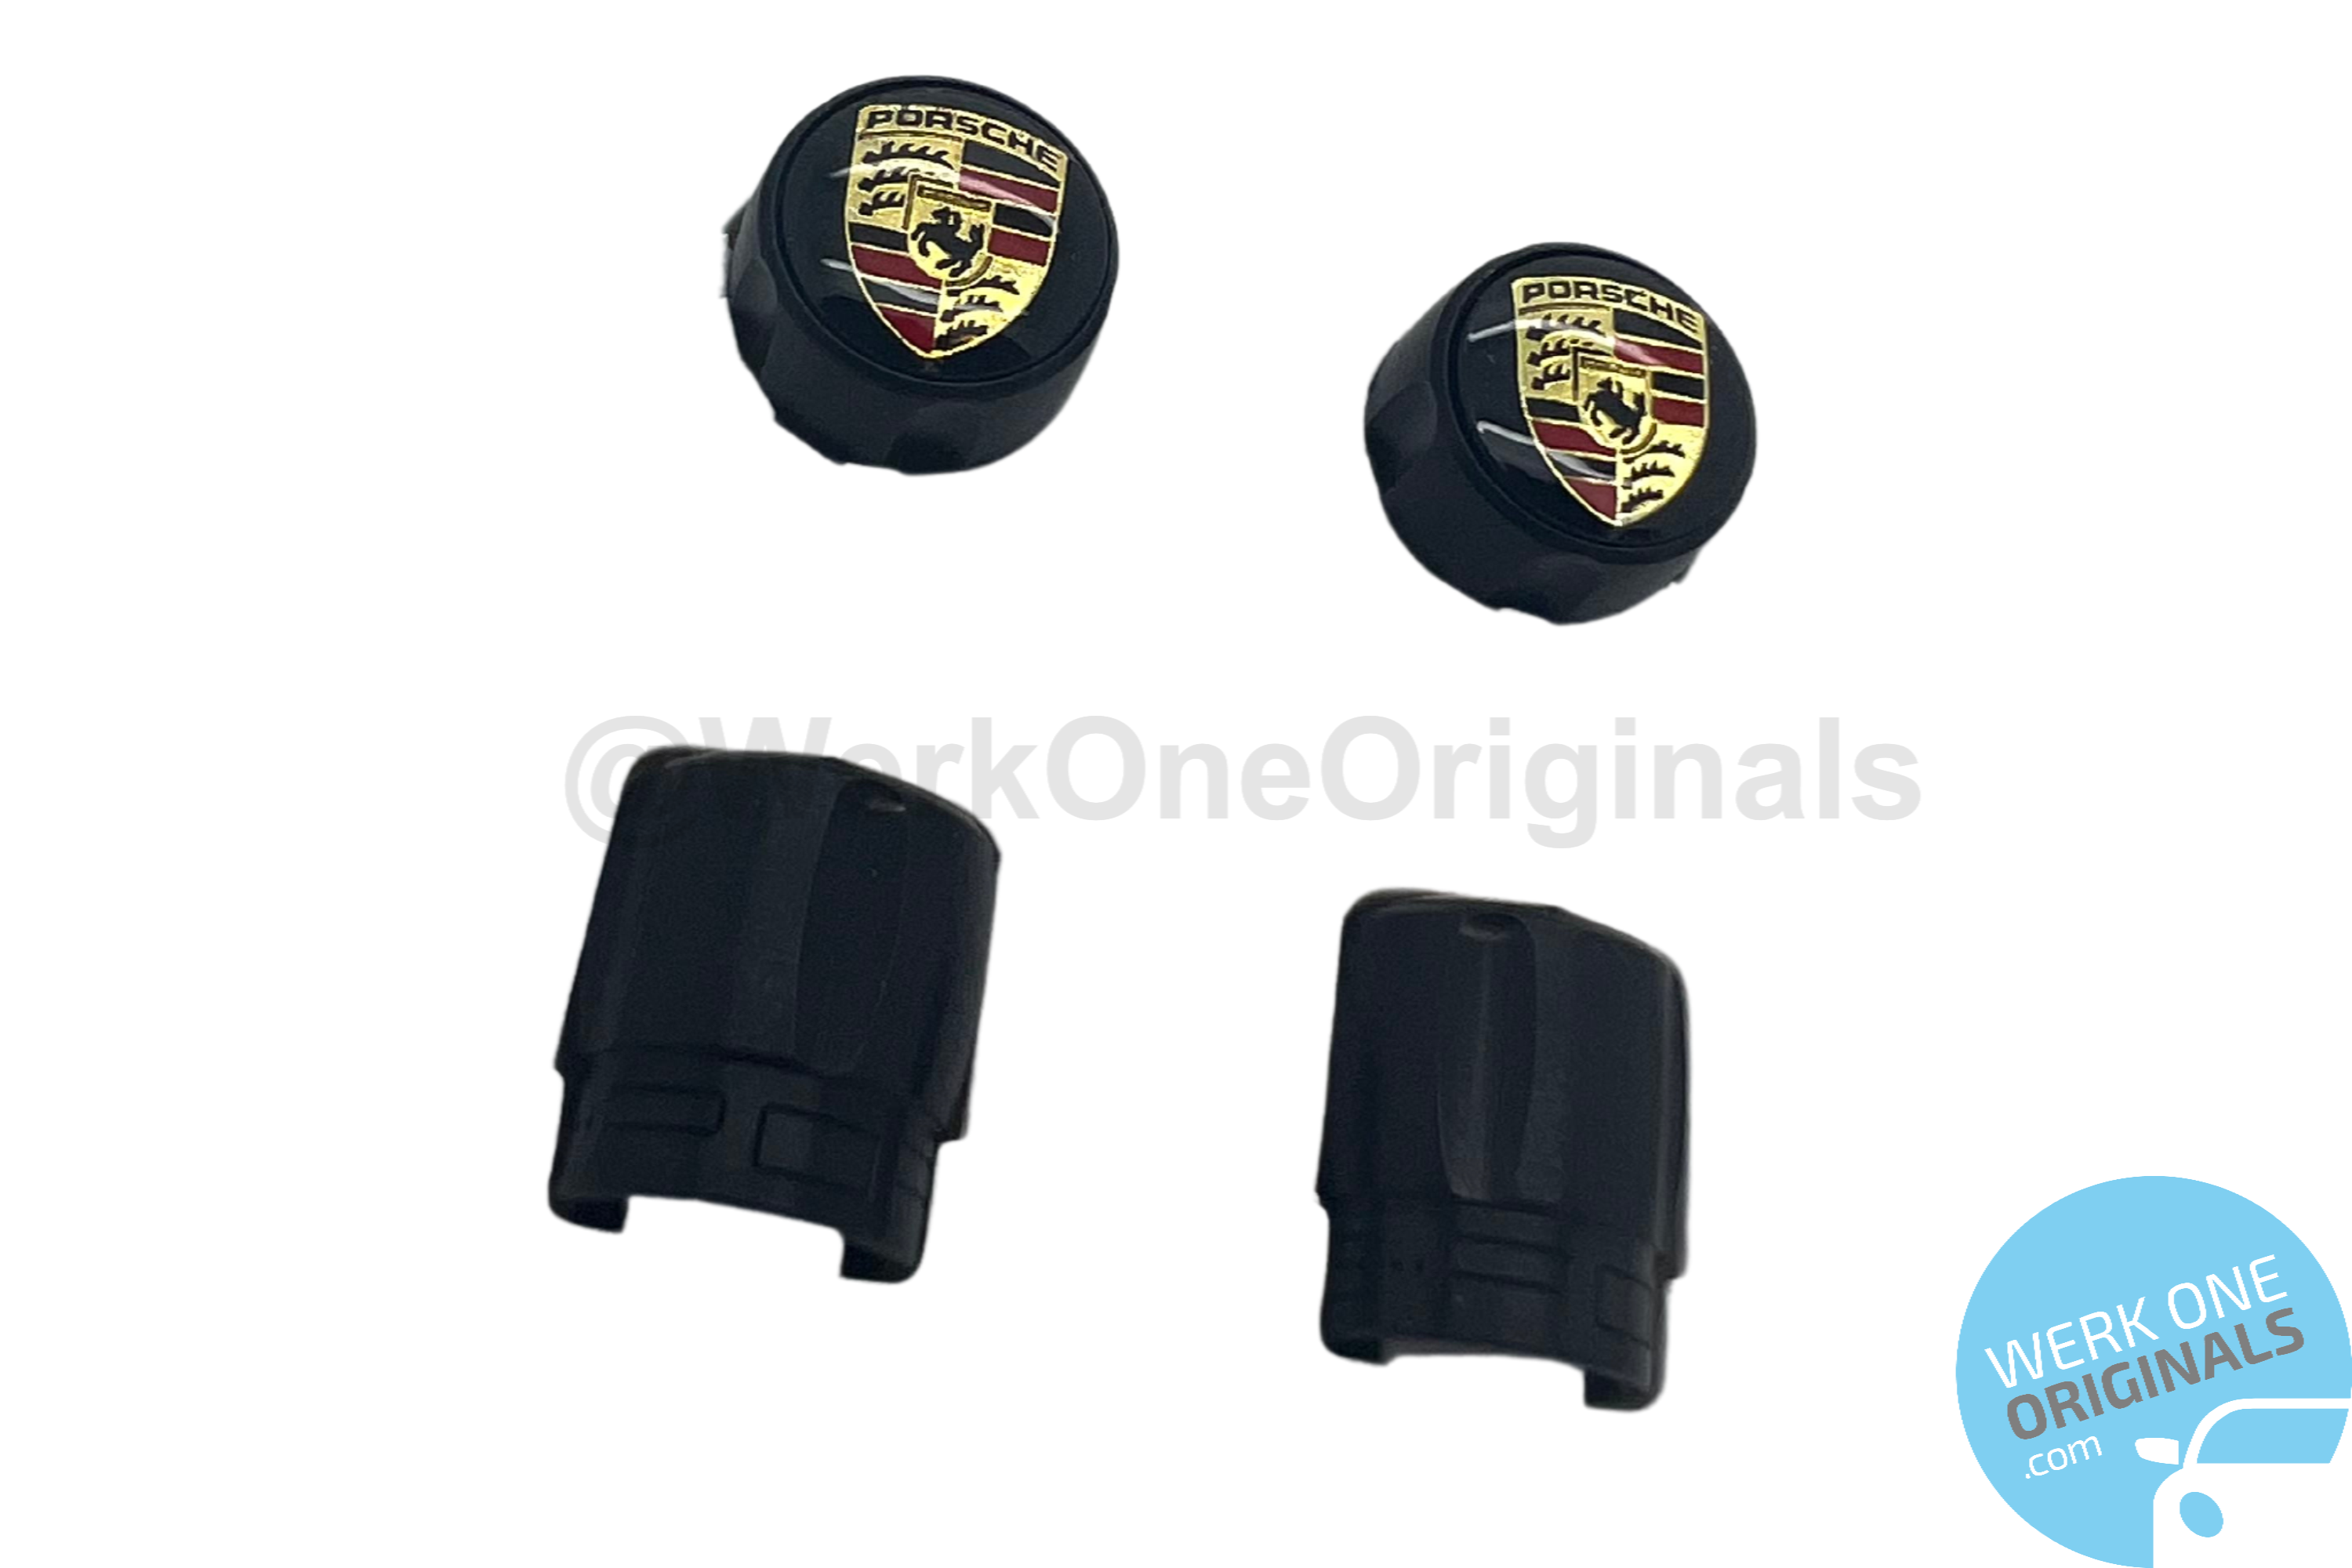 Porsche Official Valve Caps in Black with featured Colour Crest for TPMS Alloy Wheels